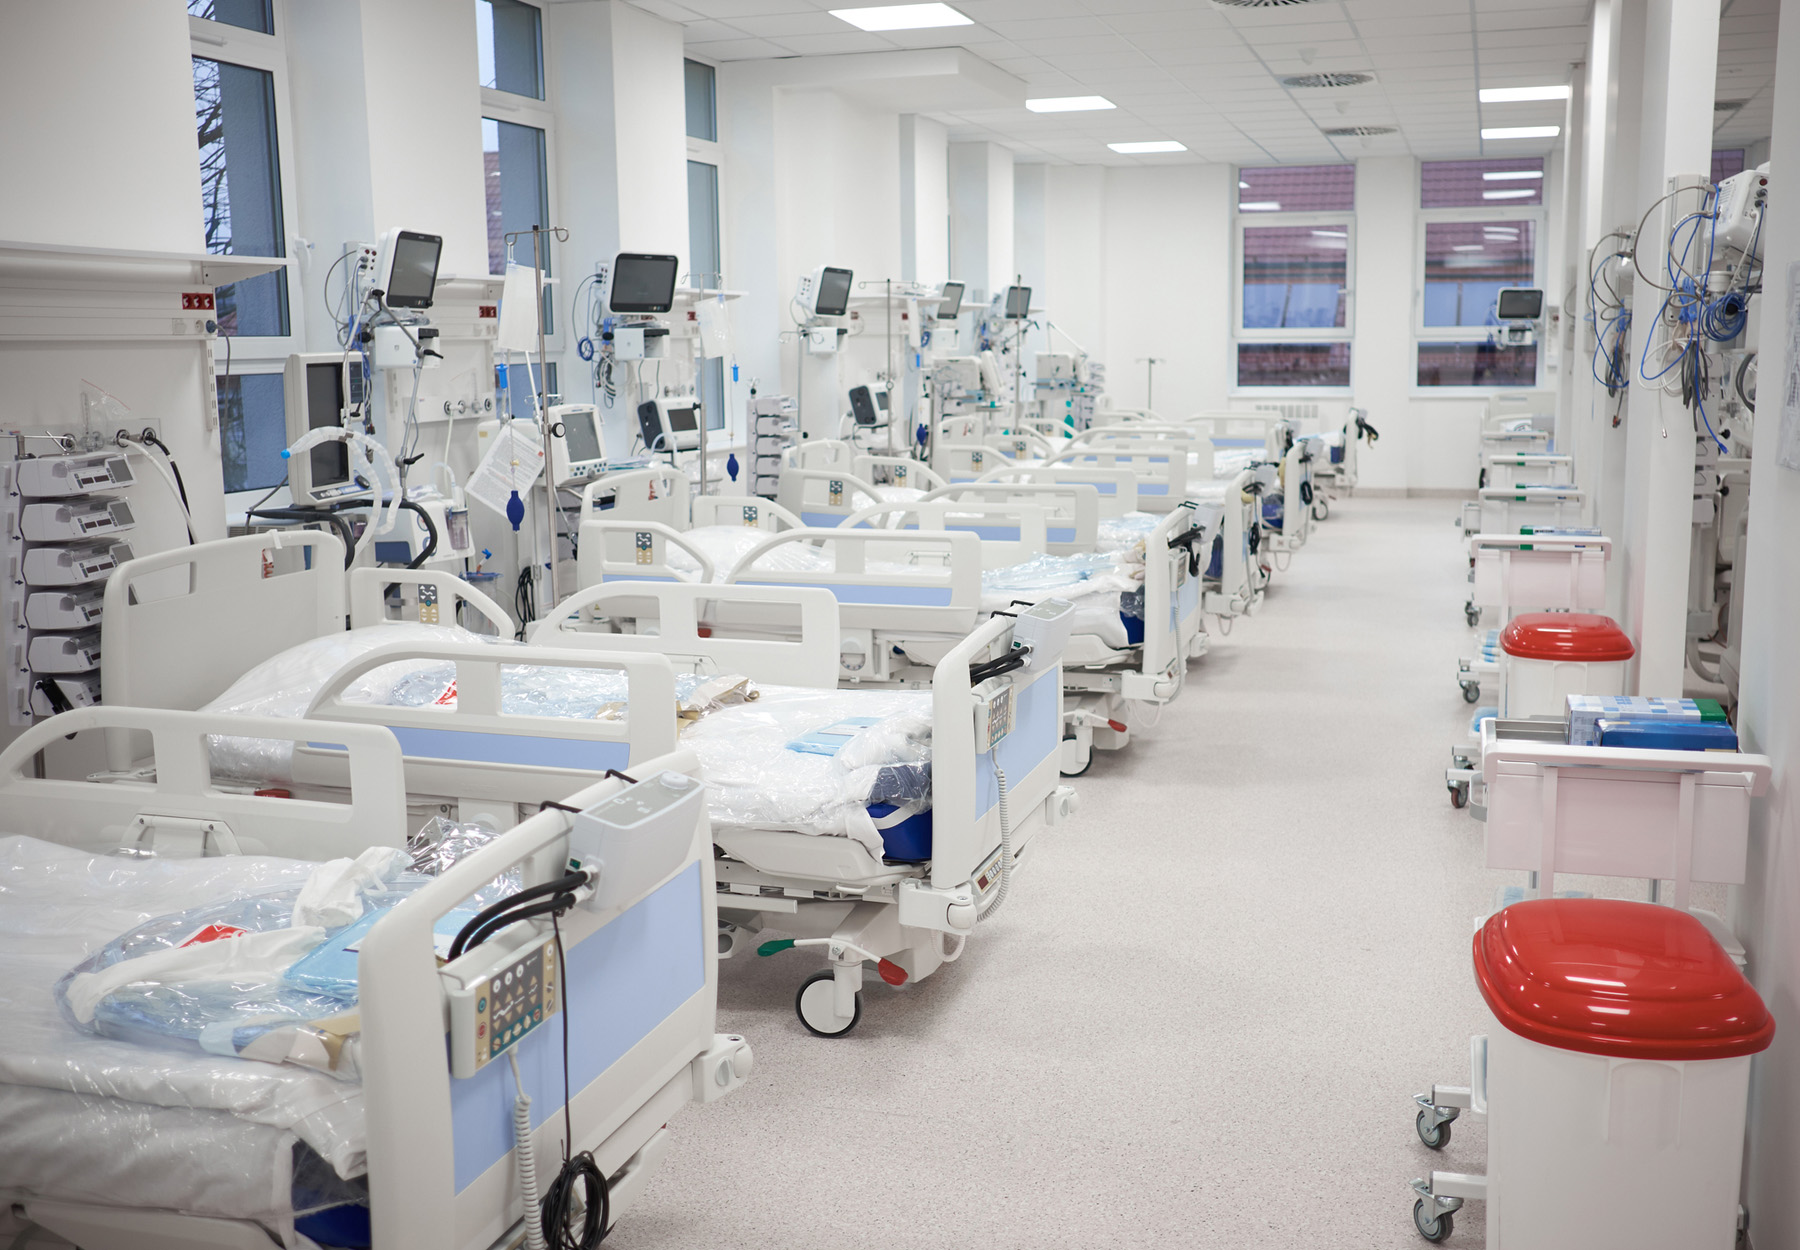 Stock image of empty hospital beds